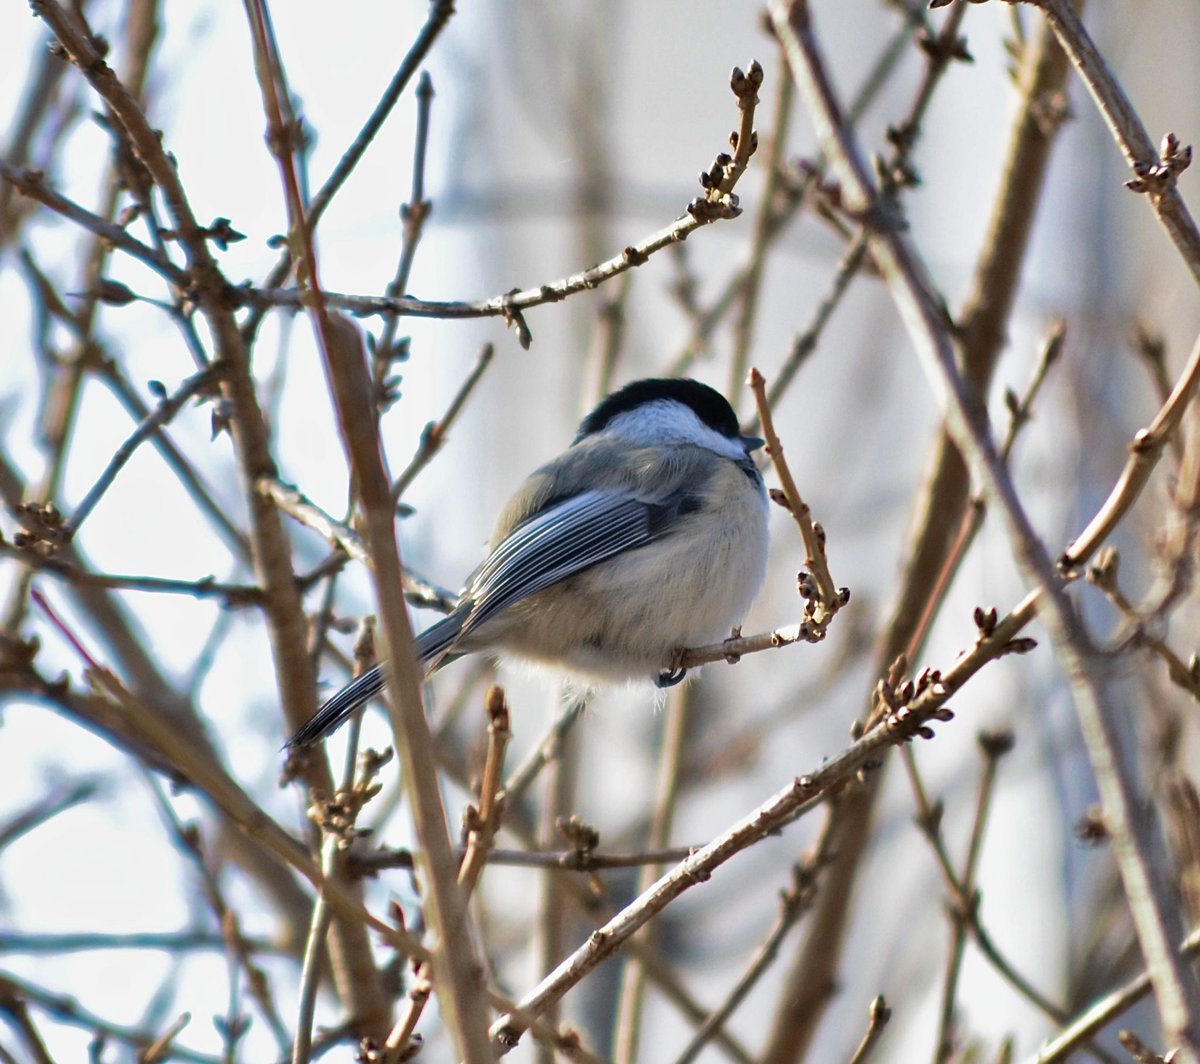 A little chickadee in the bushes. #pei #nature #birdphotography #ThePhotoHour